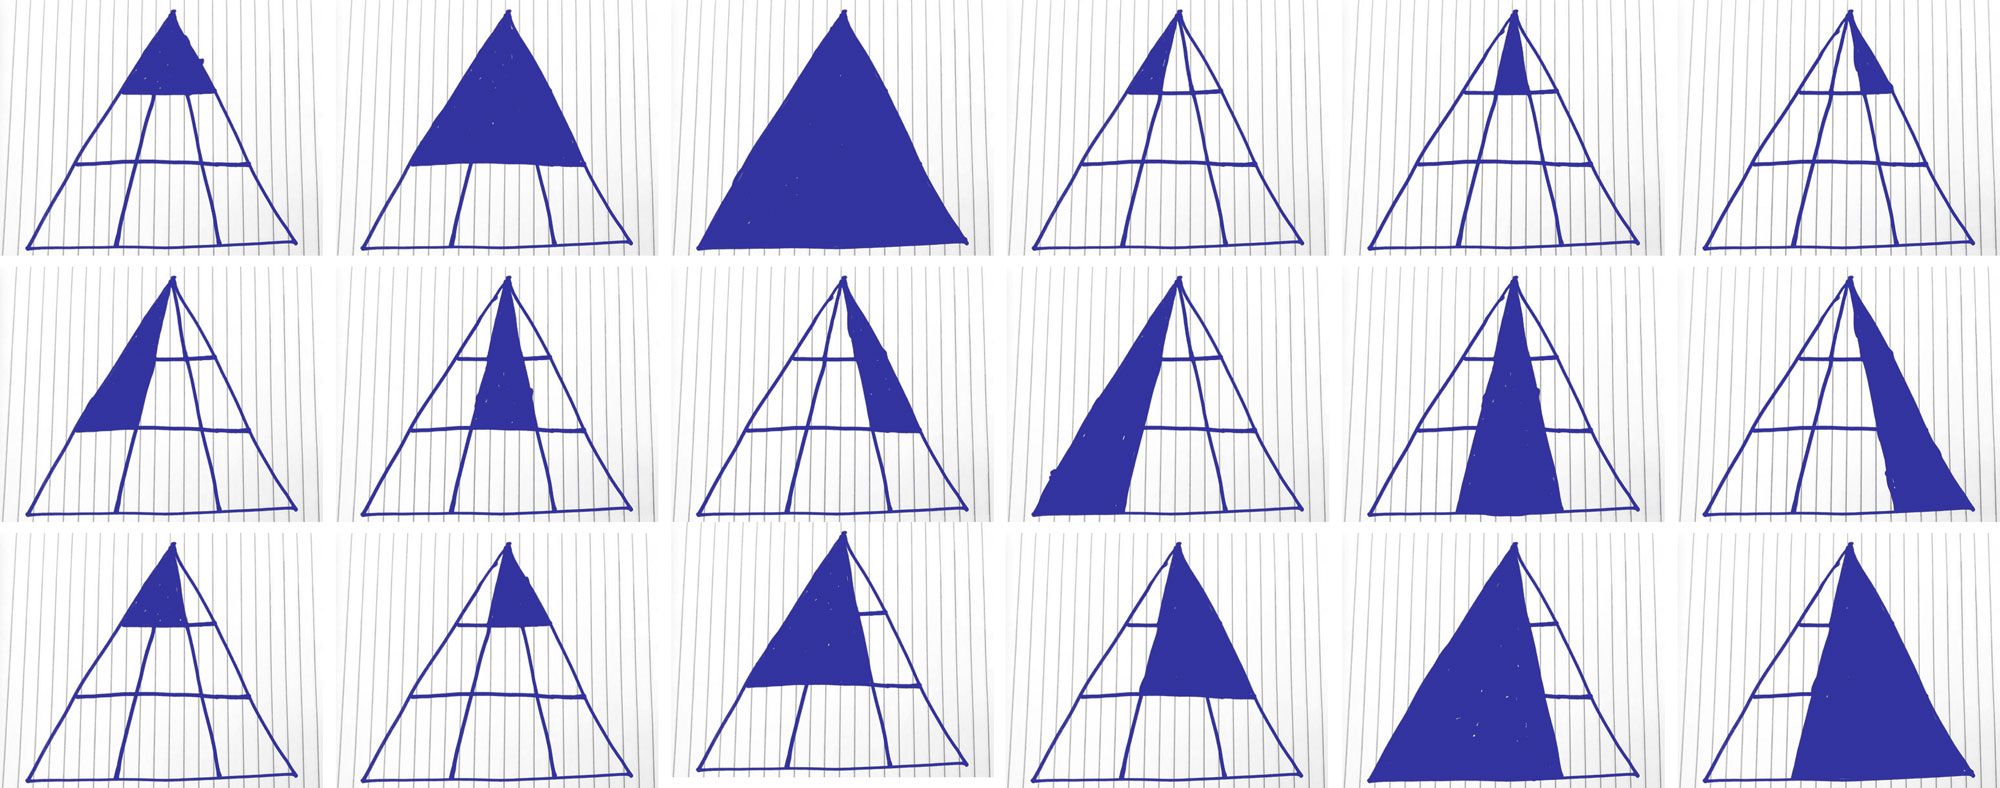 How Many Triangles Do You See - Viral Math Problem Triangle